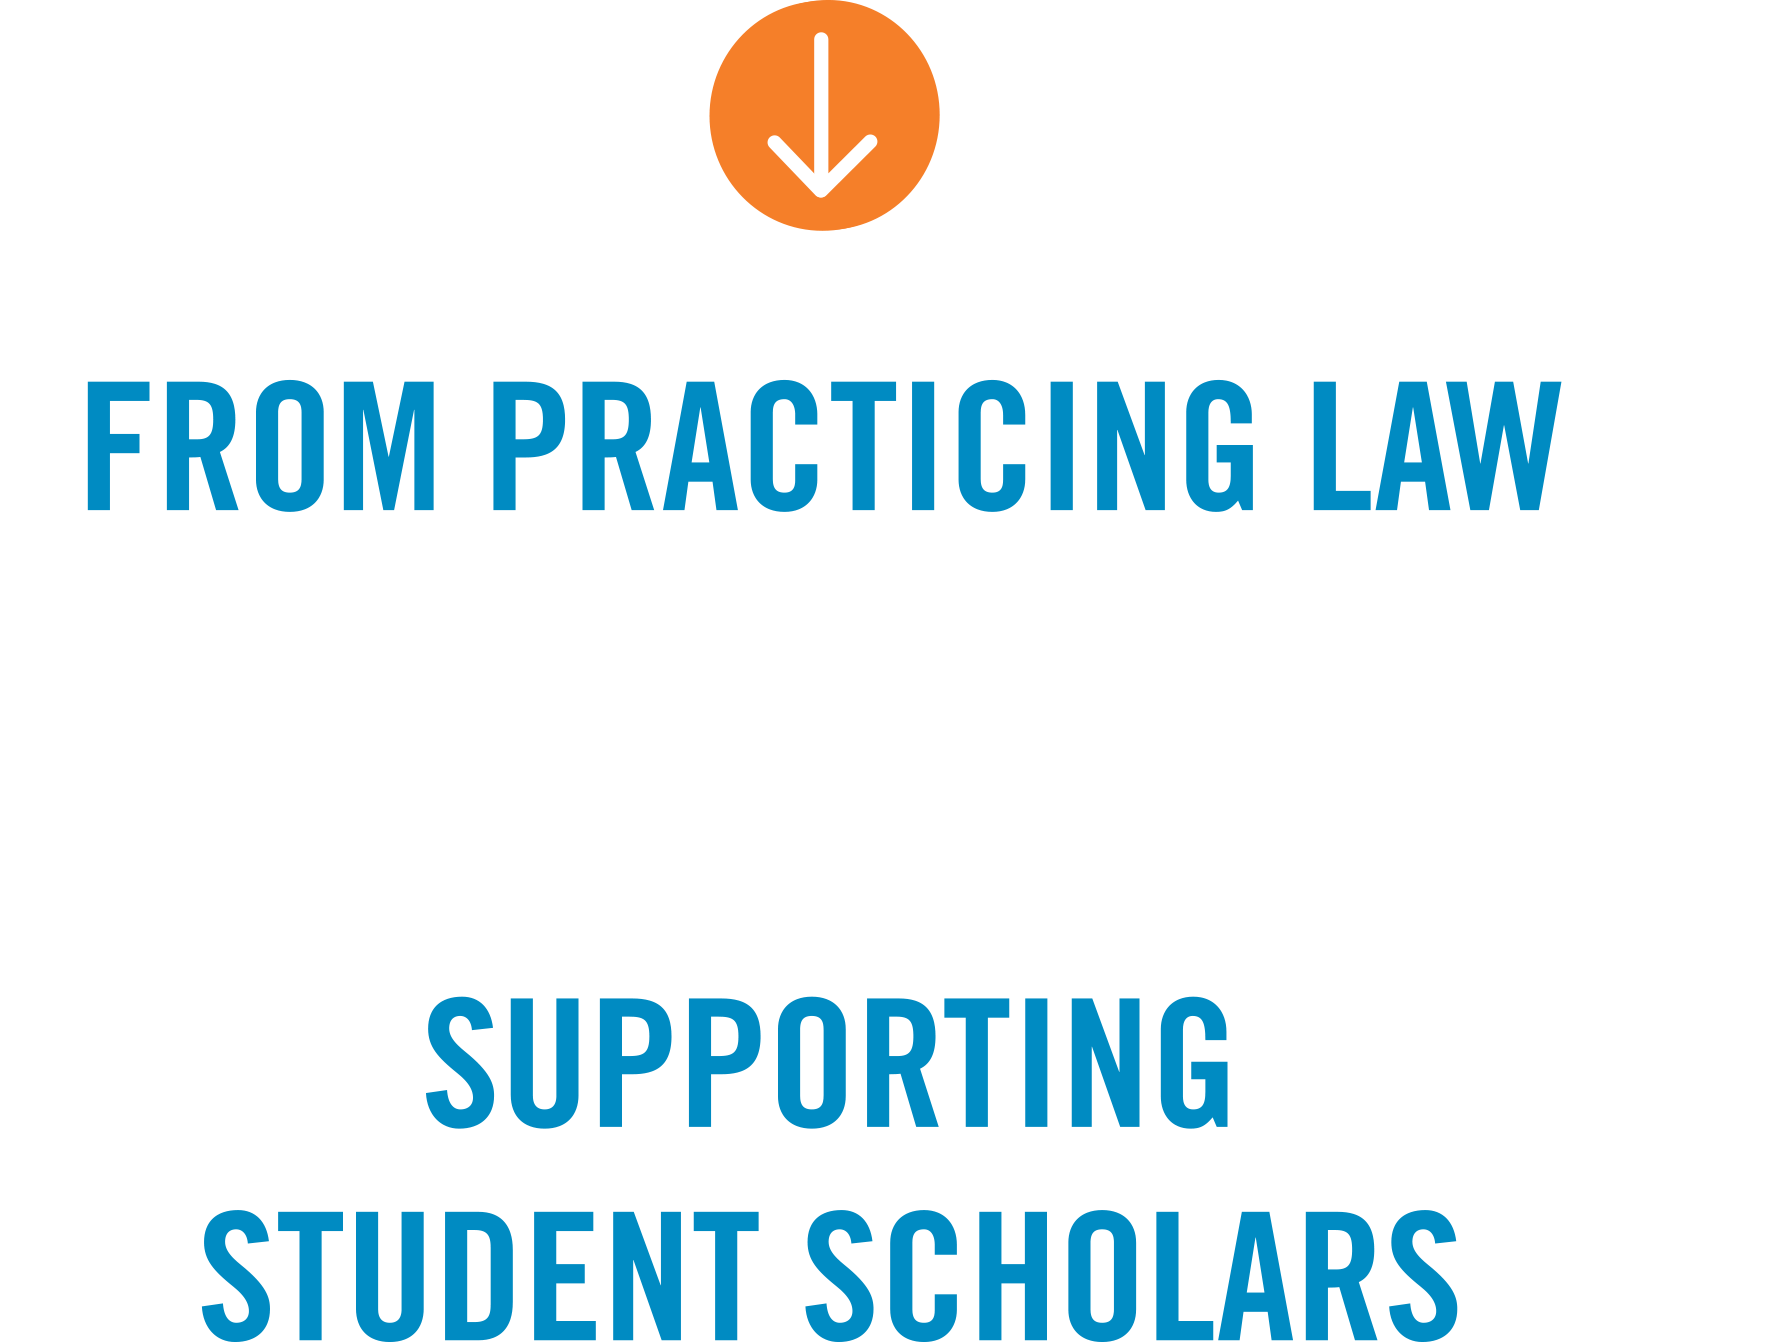 From Practicing Law to Supporting Student Scholars